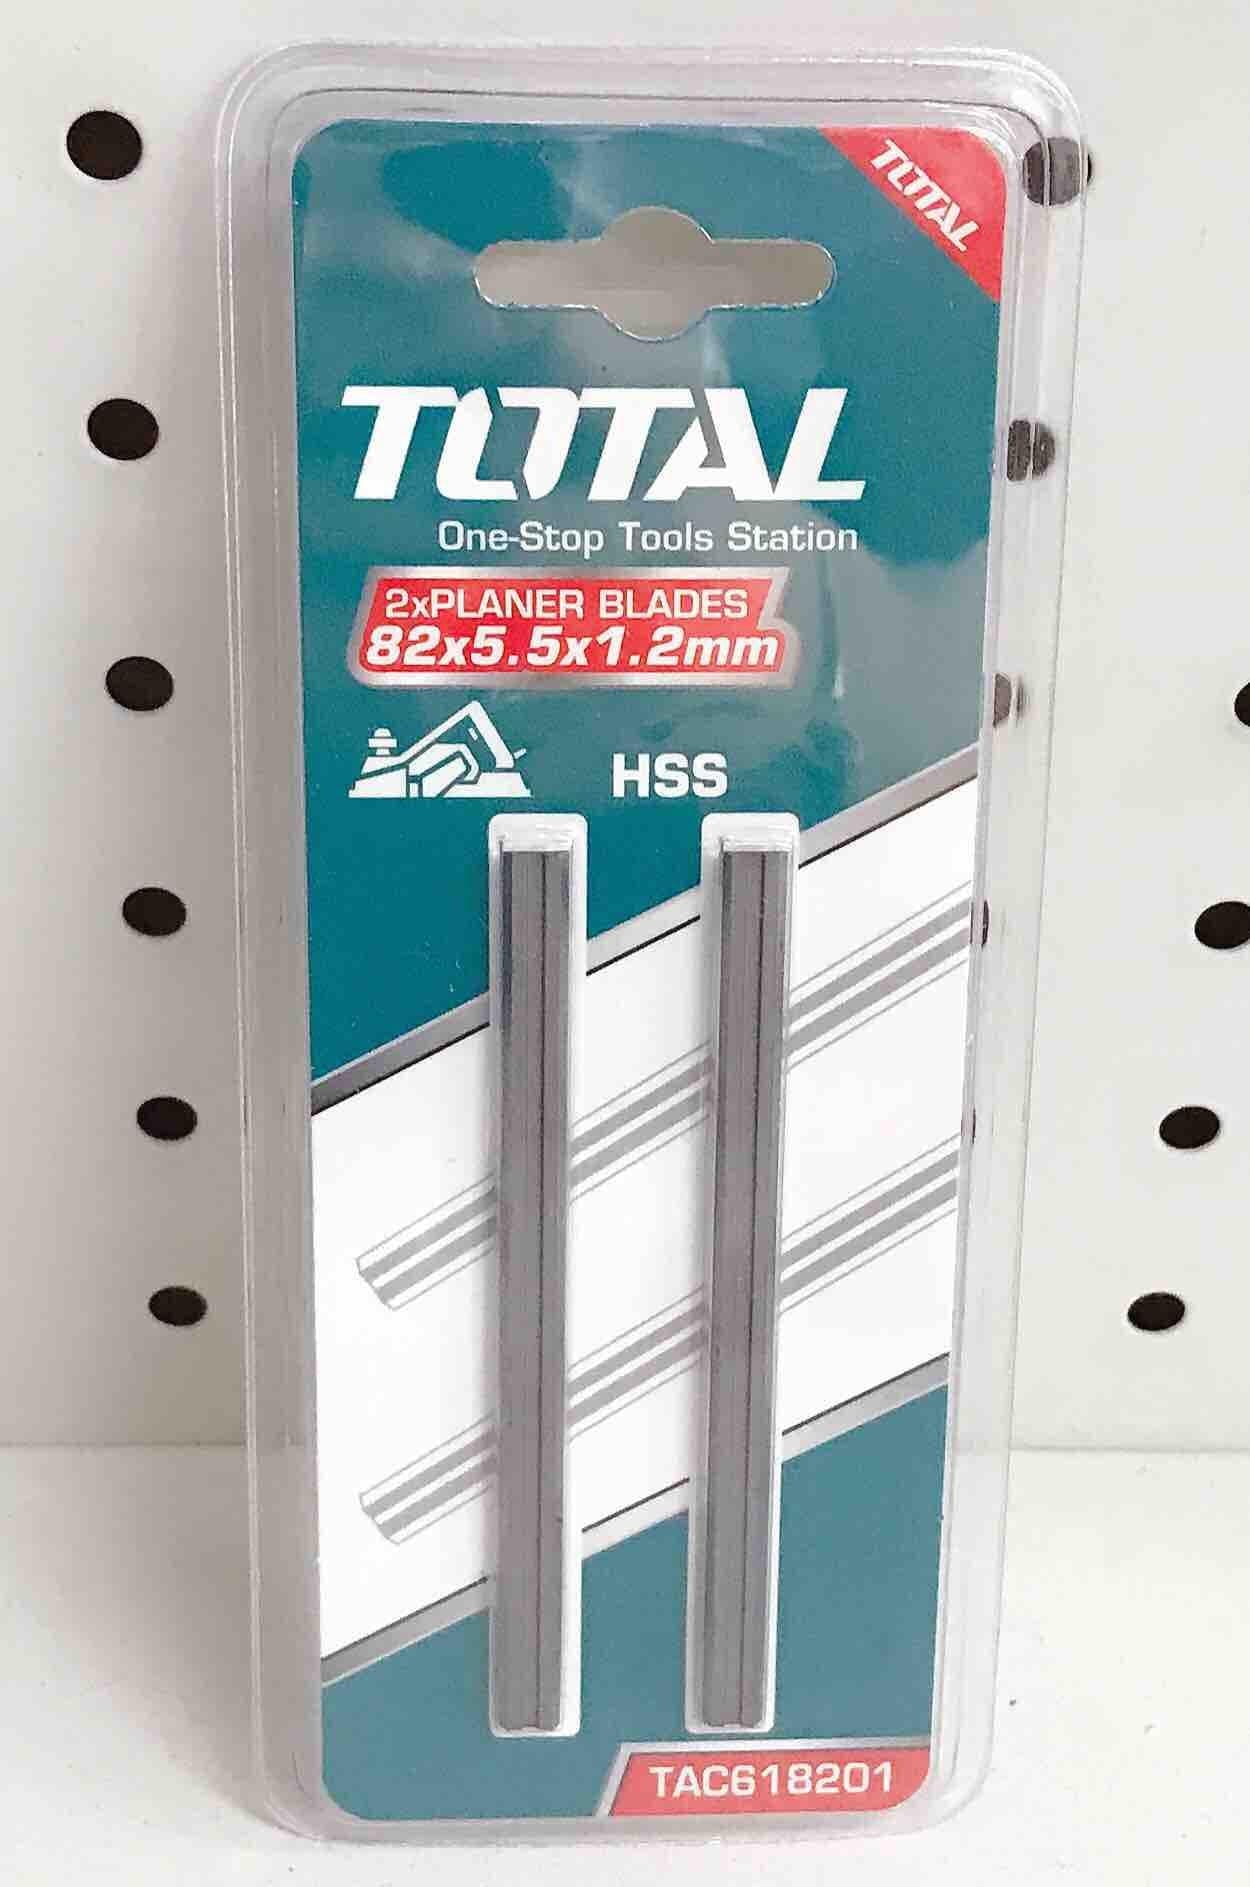 Total Planer Blade - TAC618201 | Supply Master | Accra, Ghana Saw Blades Buy Tools hardware Building materials